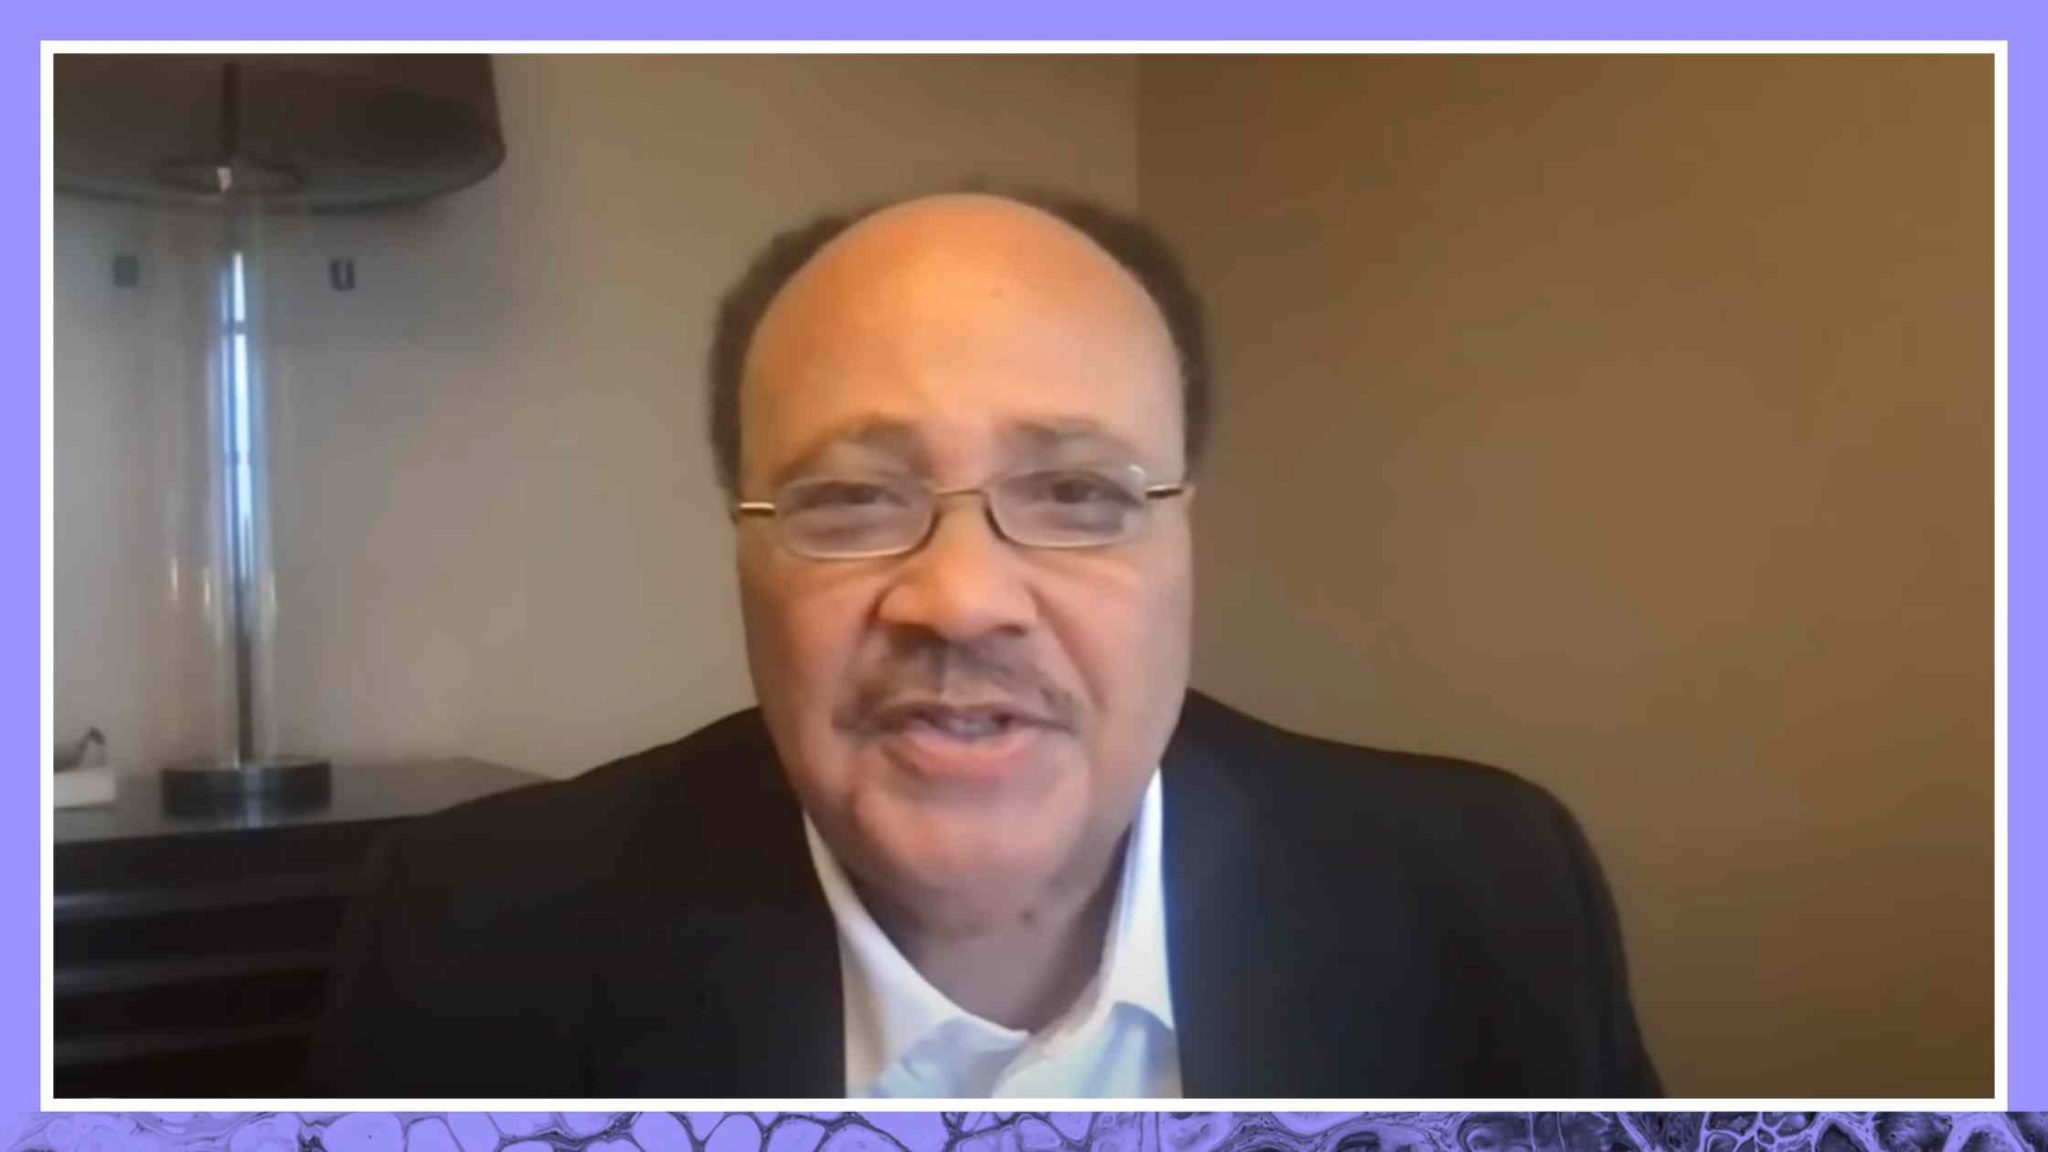 Martin Luther King III Reflects on Dr. King’s Legacy in Divided Times Transcript